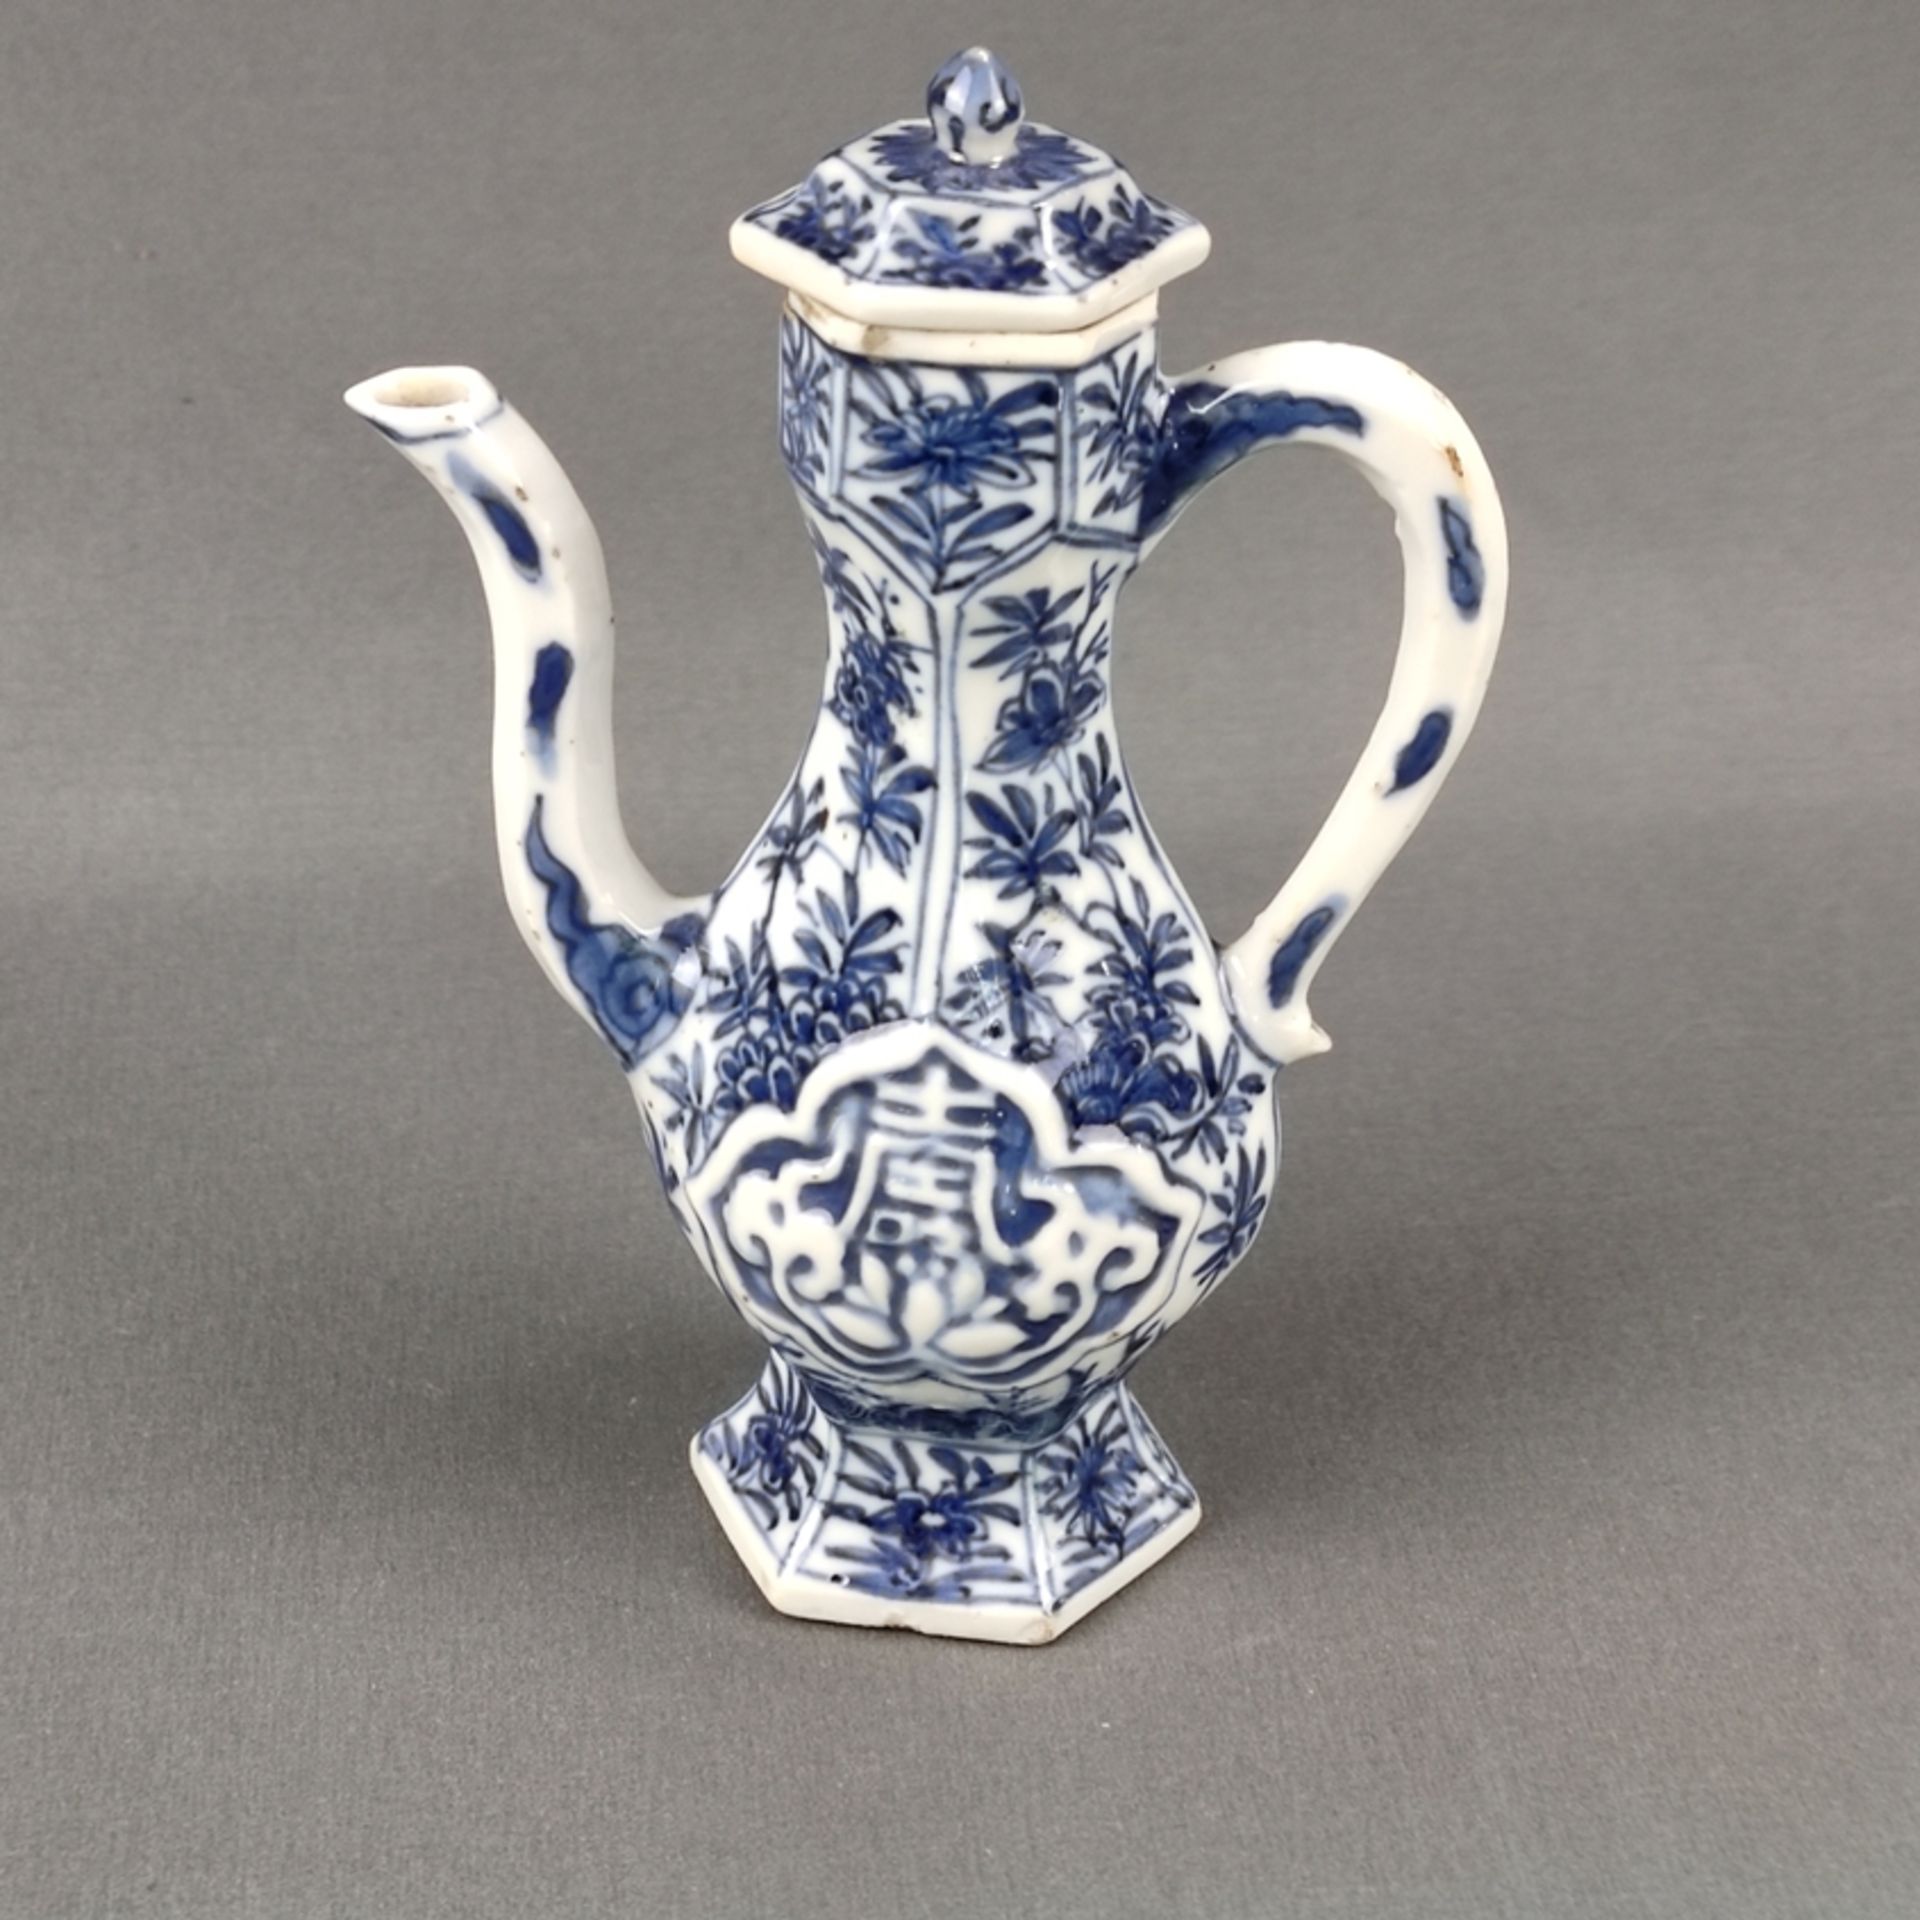 An underglazed blue porcelain jug, China, 18th/19th century, probably made for the Arabian market, 